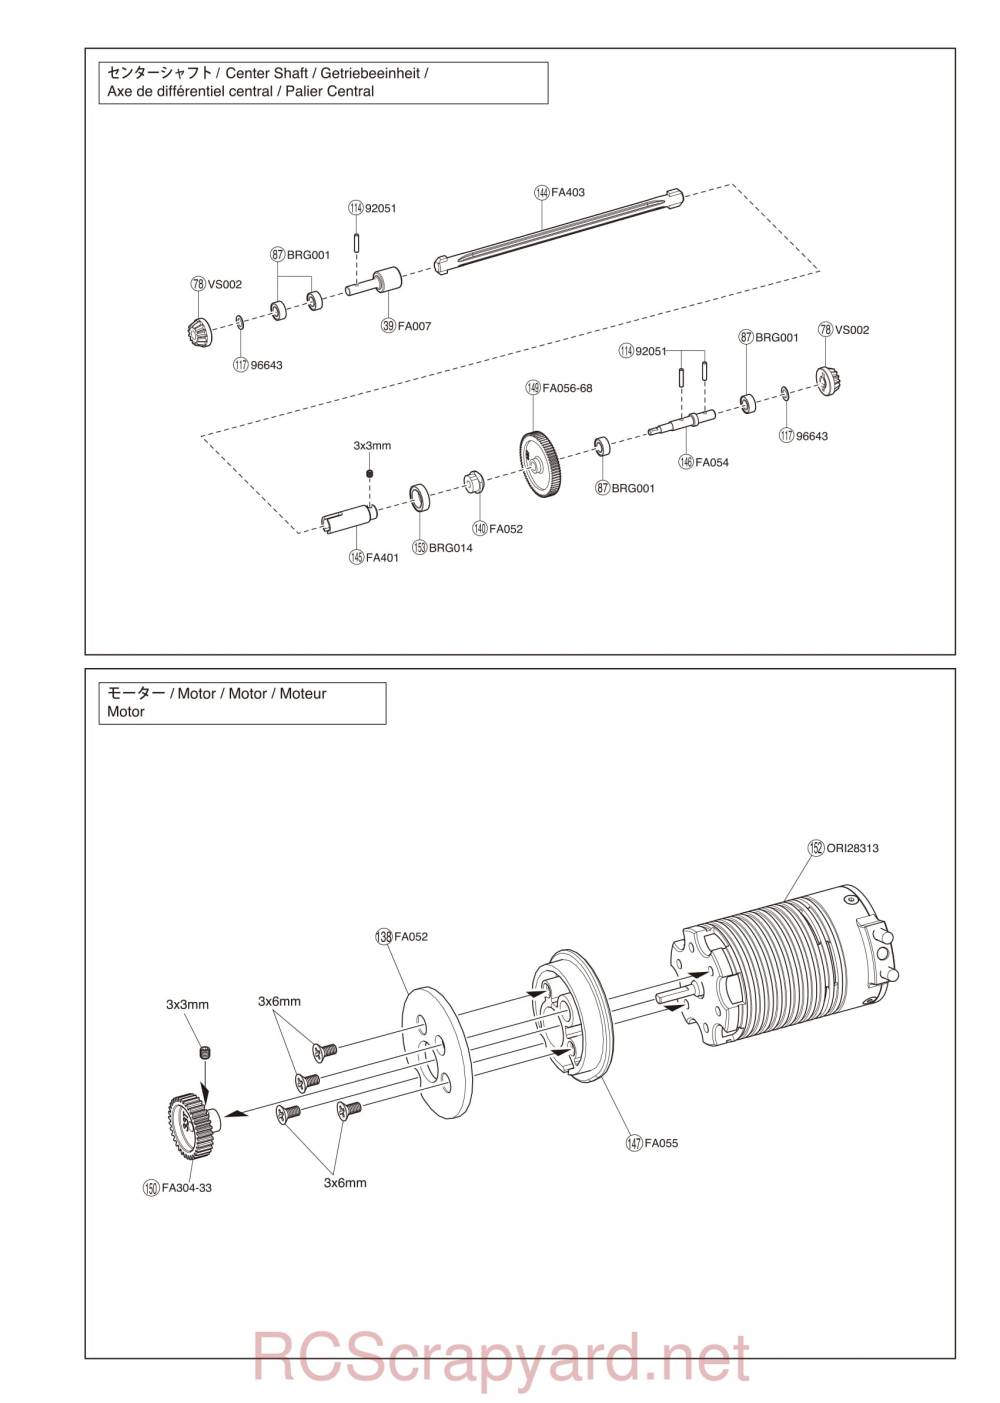 Kyosho EP Fazer VEi - Exploded View - Page 4